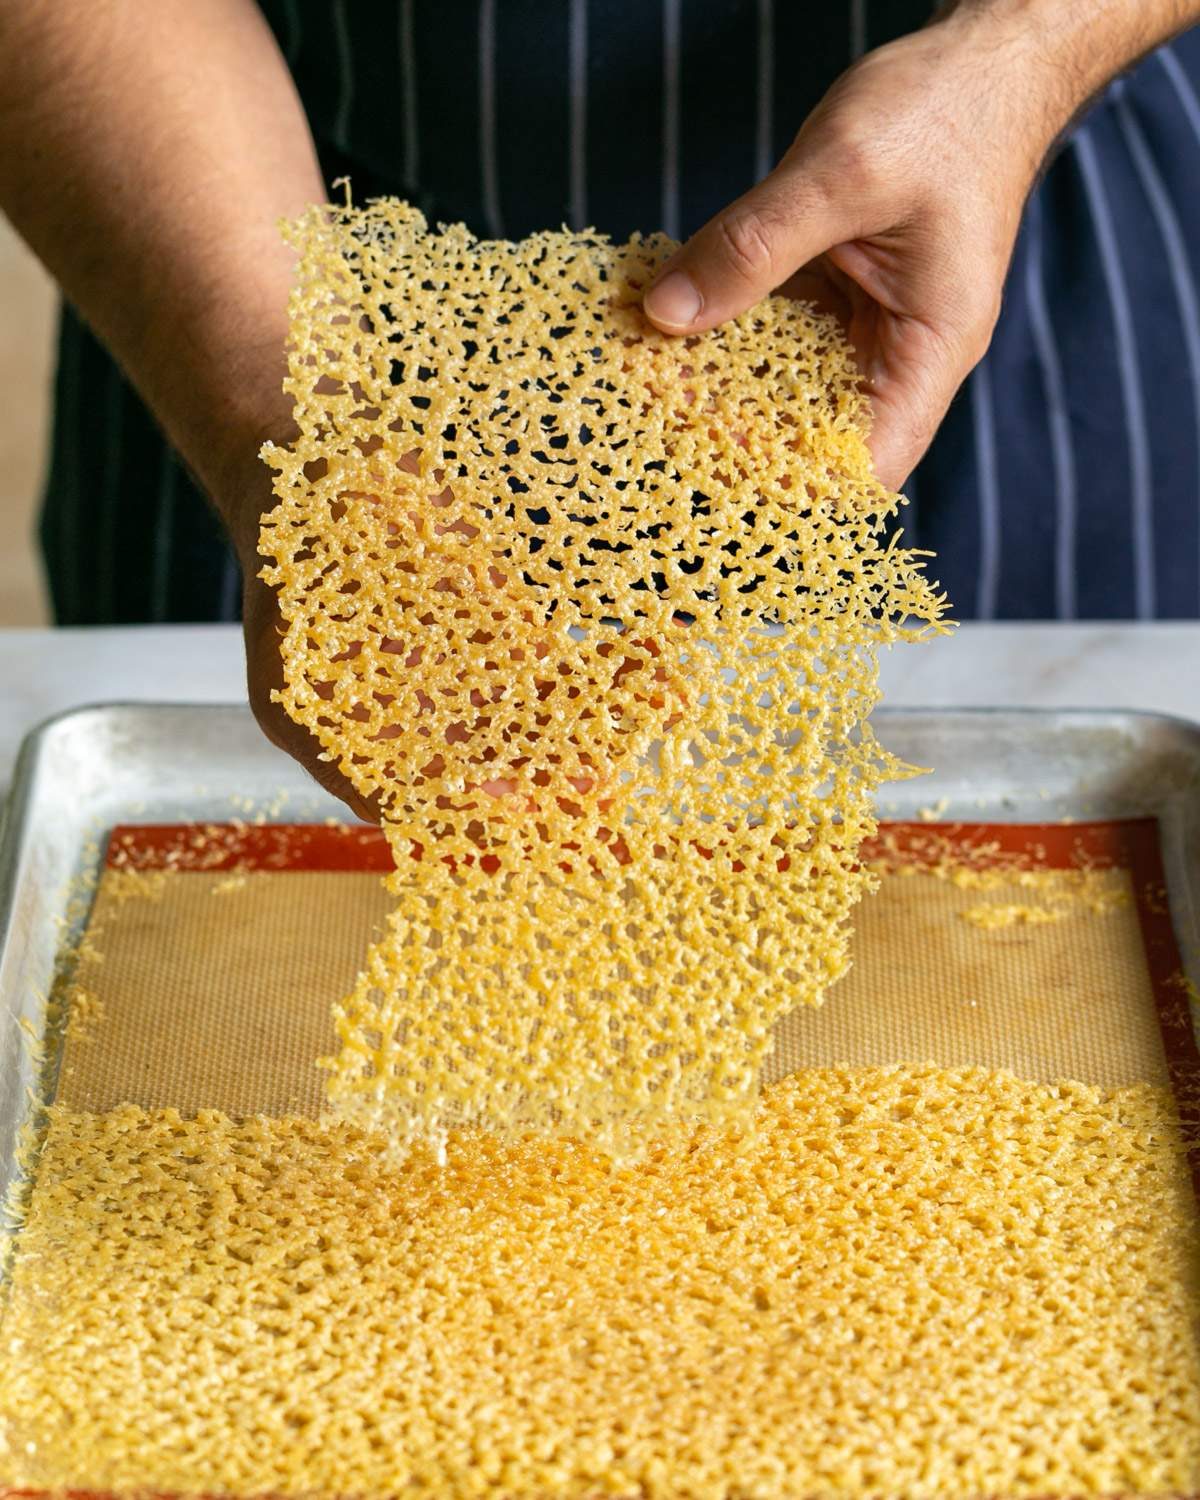 Showing texture of Parmesan cheese crisp in hands